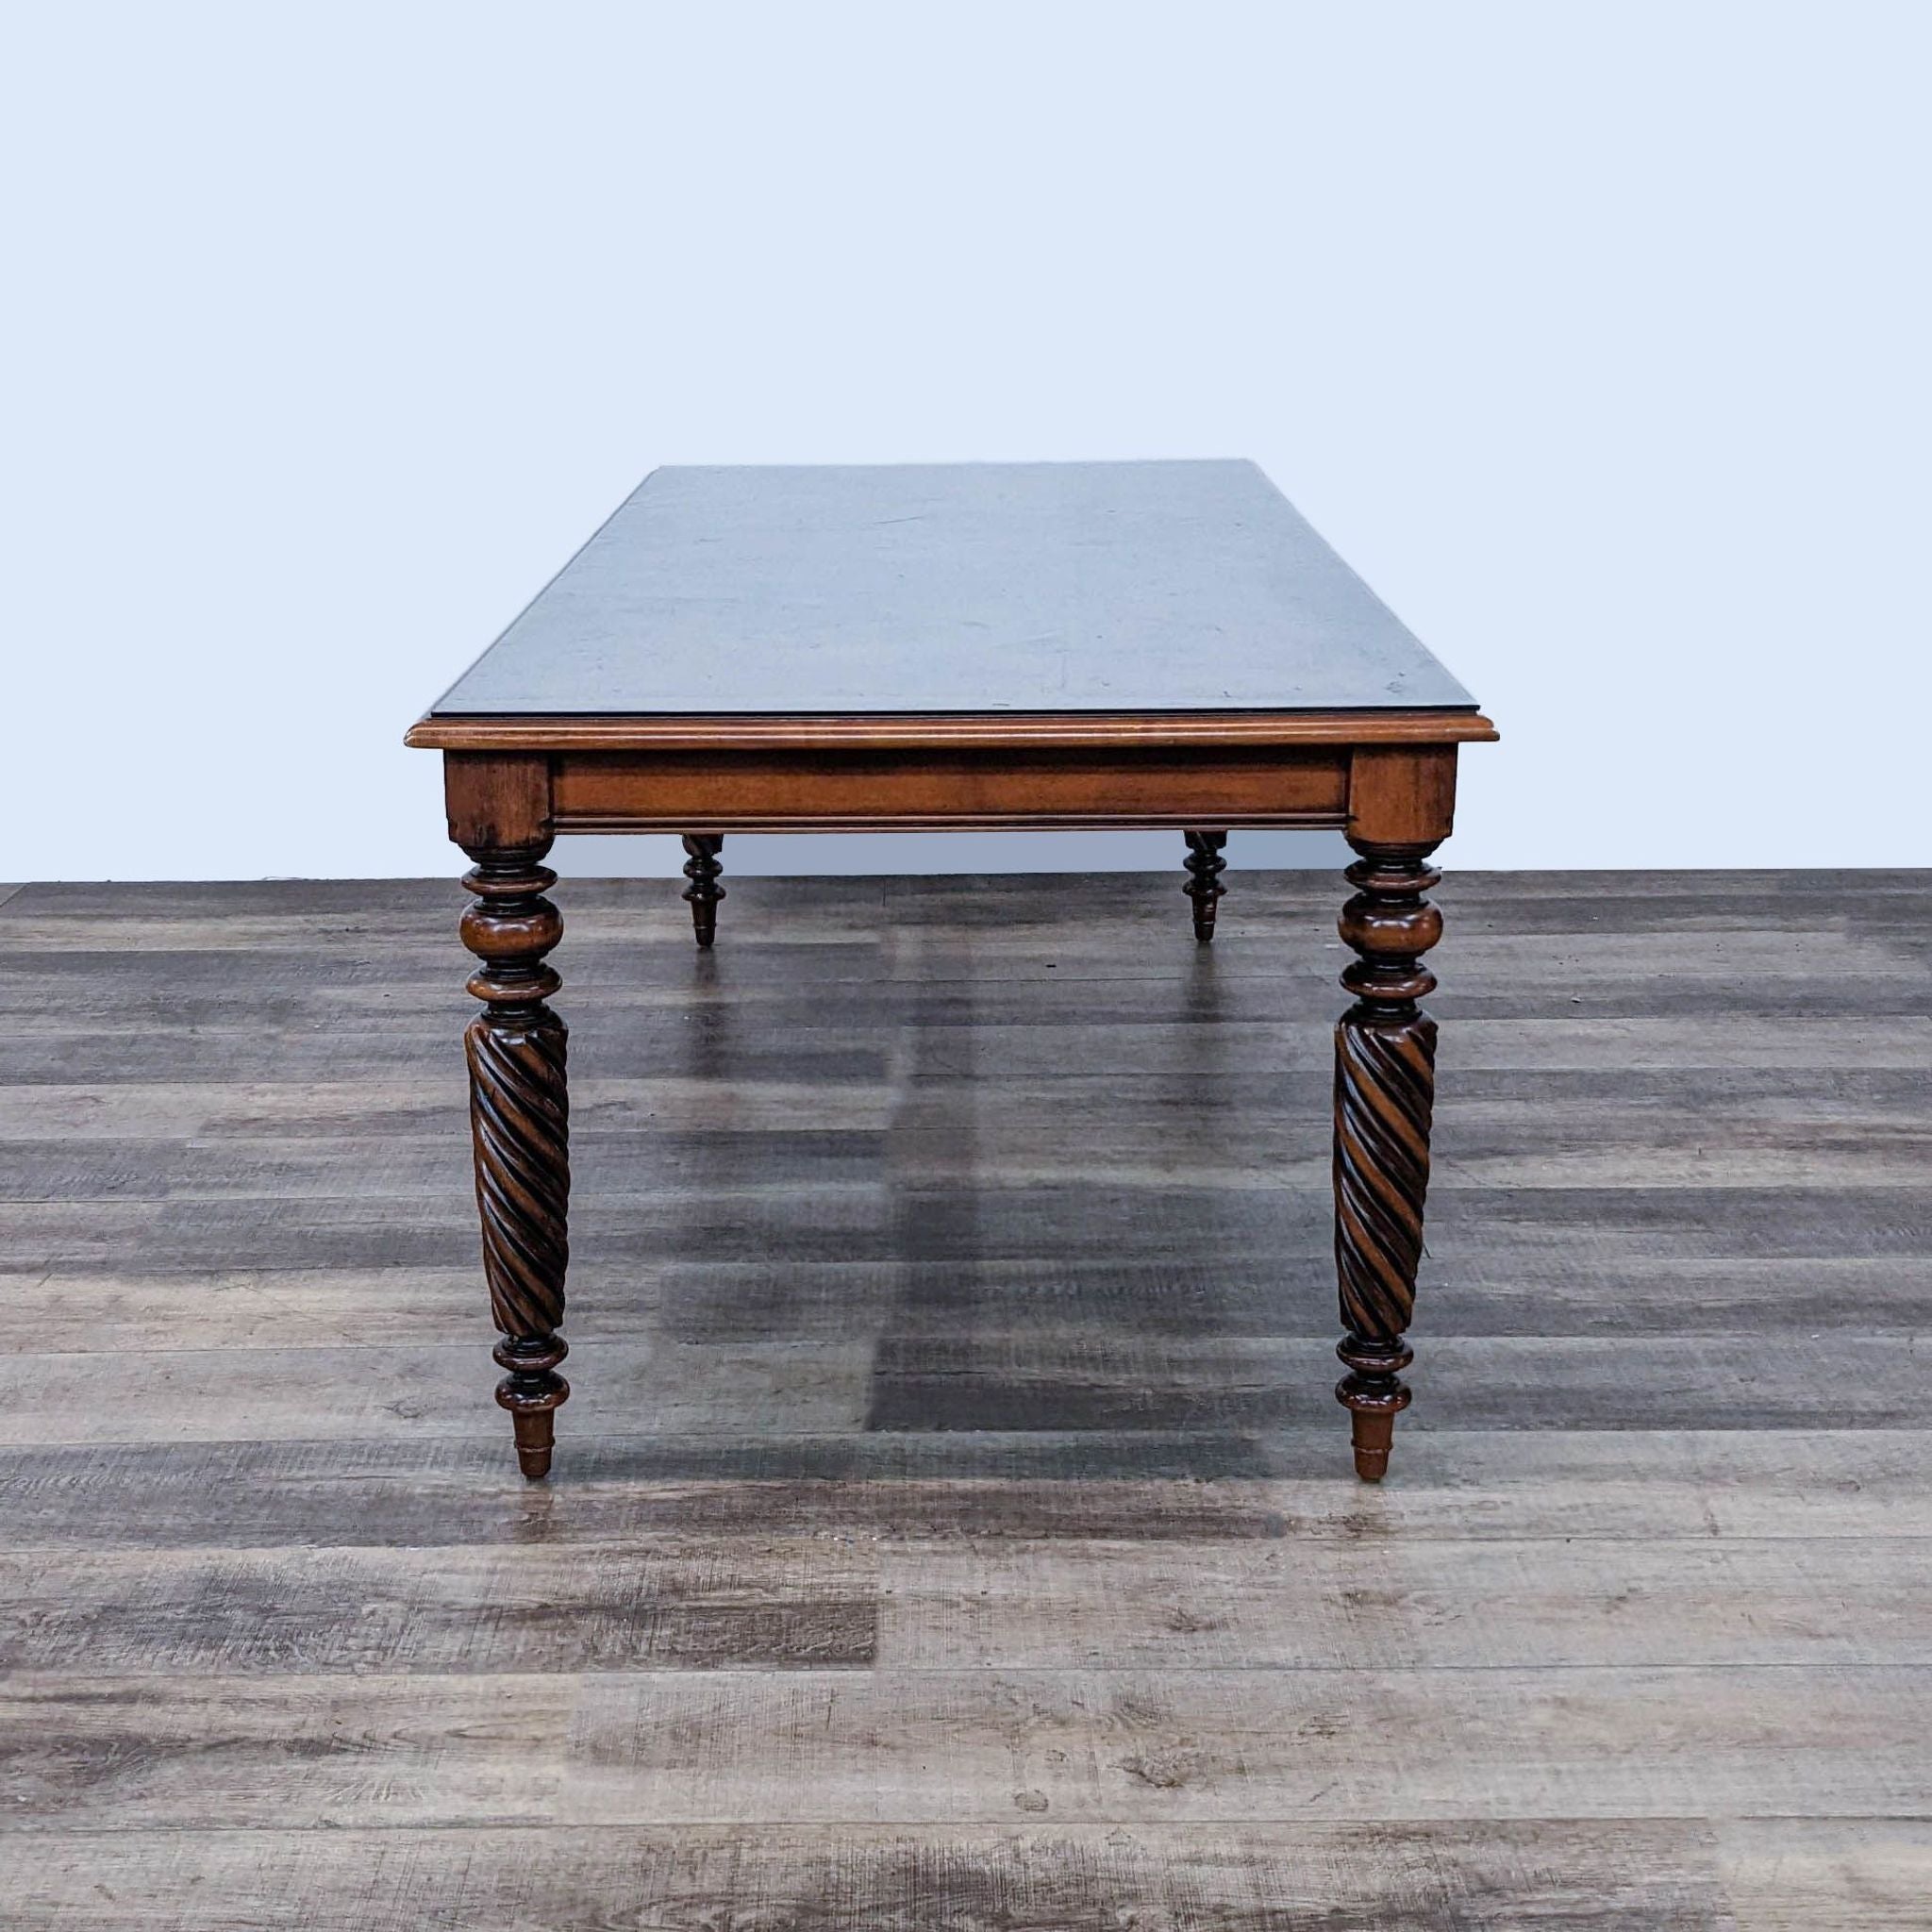 Extendable dining table by Reperch with twisted legs in Early American Harvest Style, shown not extended.